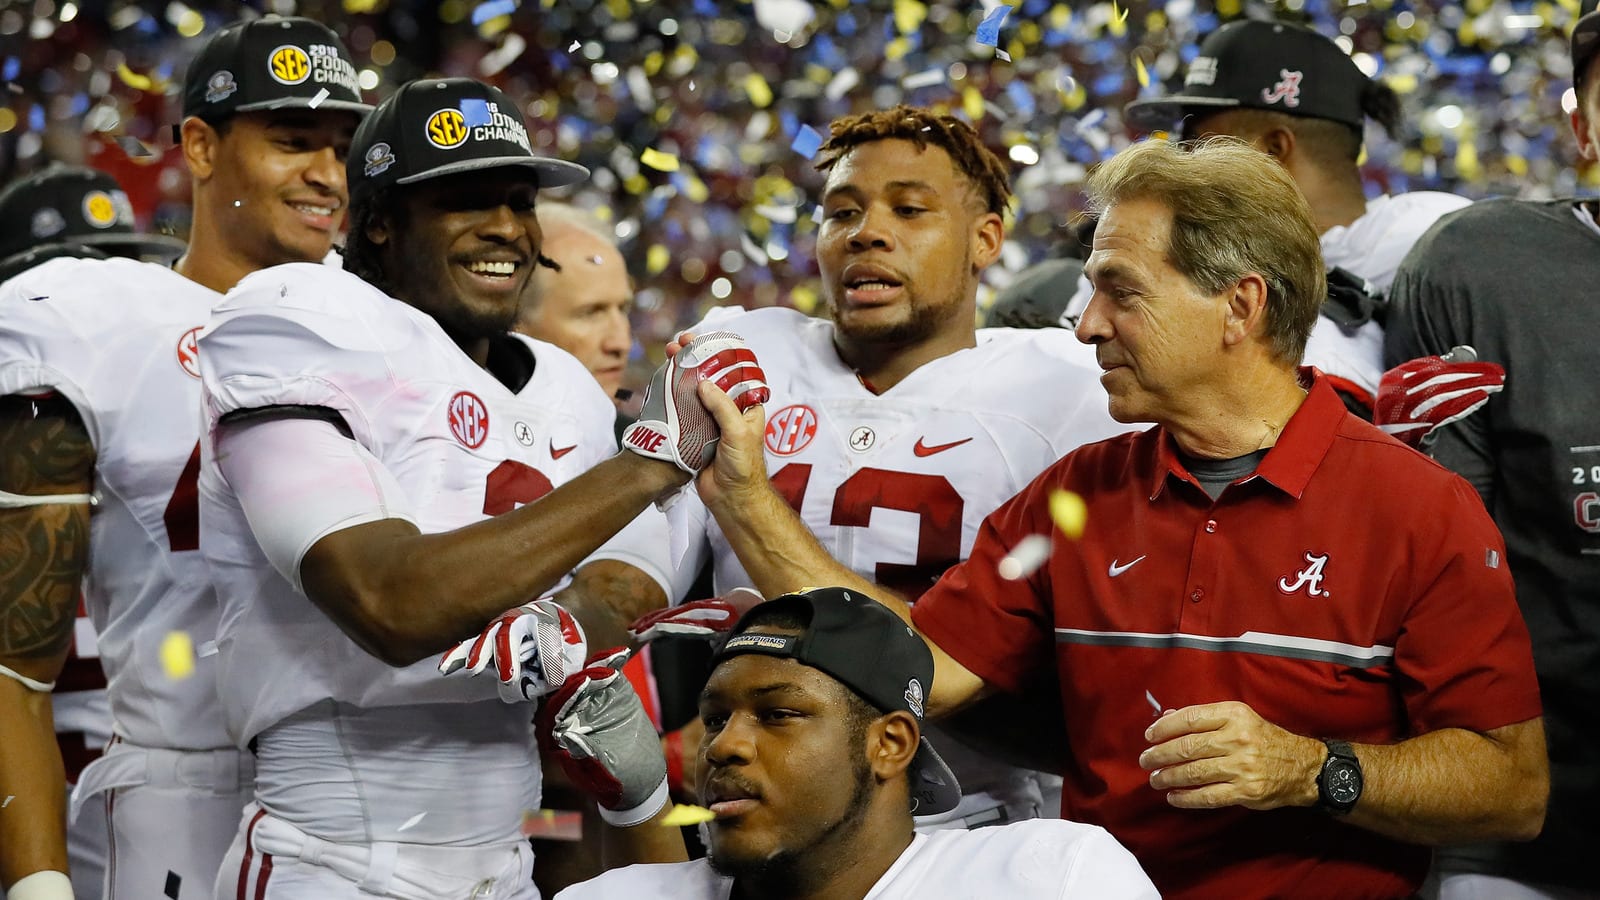 Final College Football Playoff rankings: Alabama reigns 